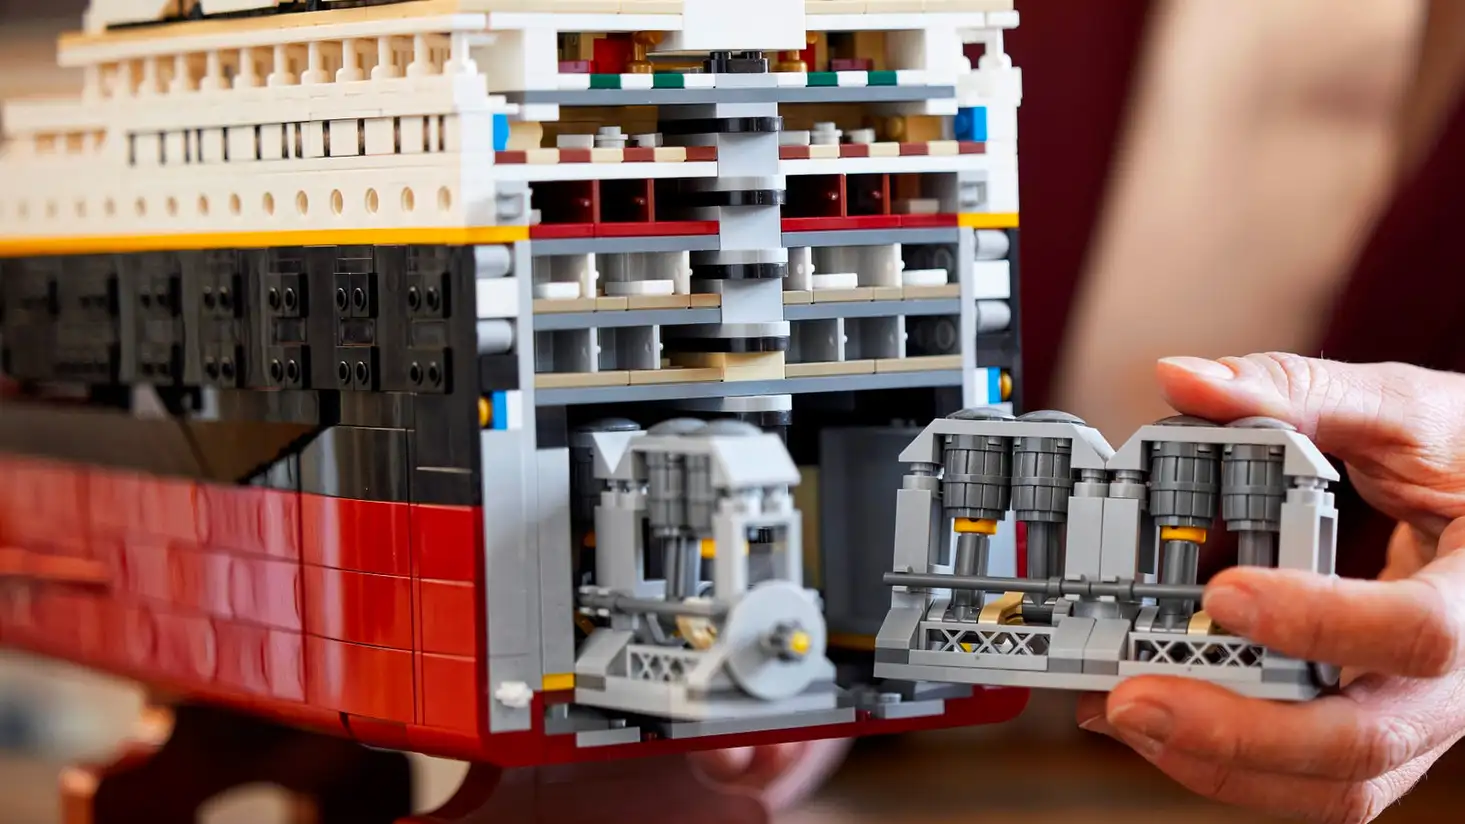 New Lego Is The Company's Largest-Ever Model Set